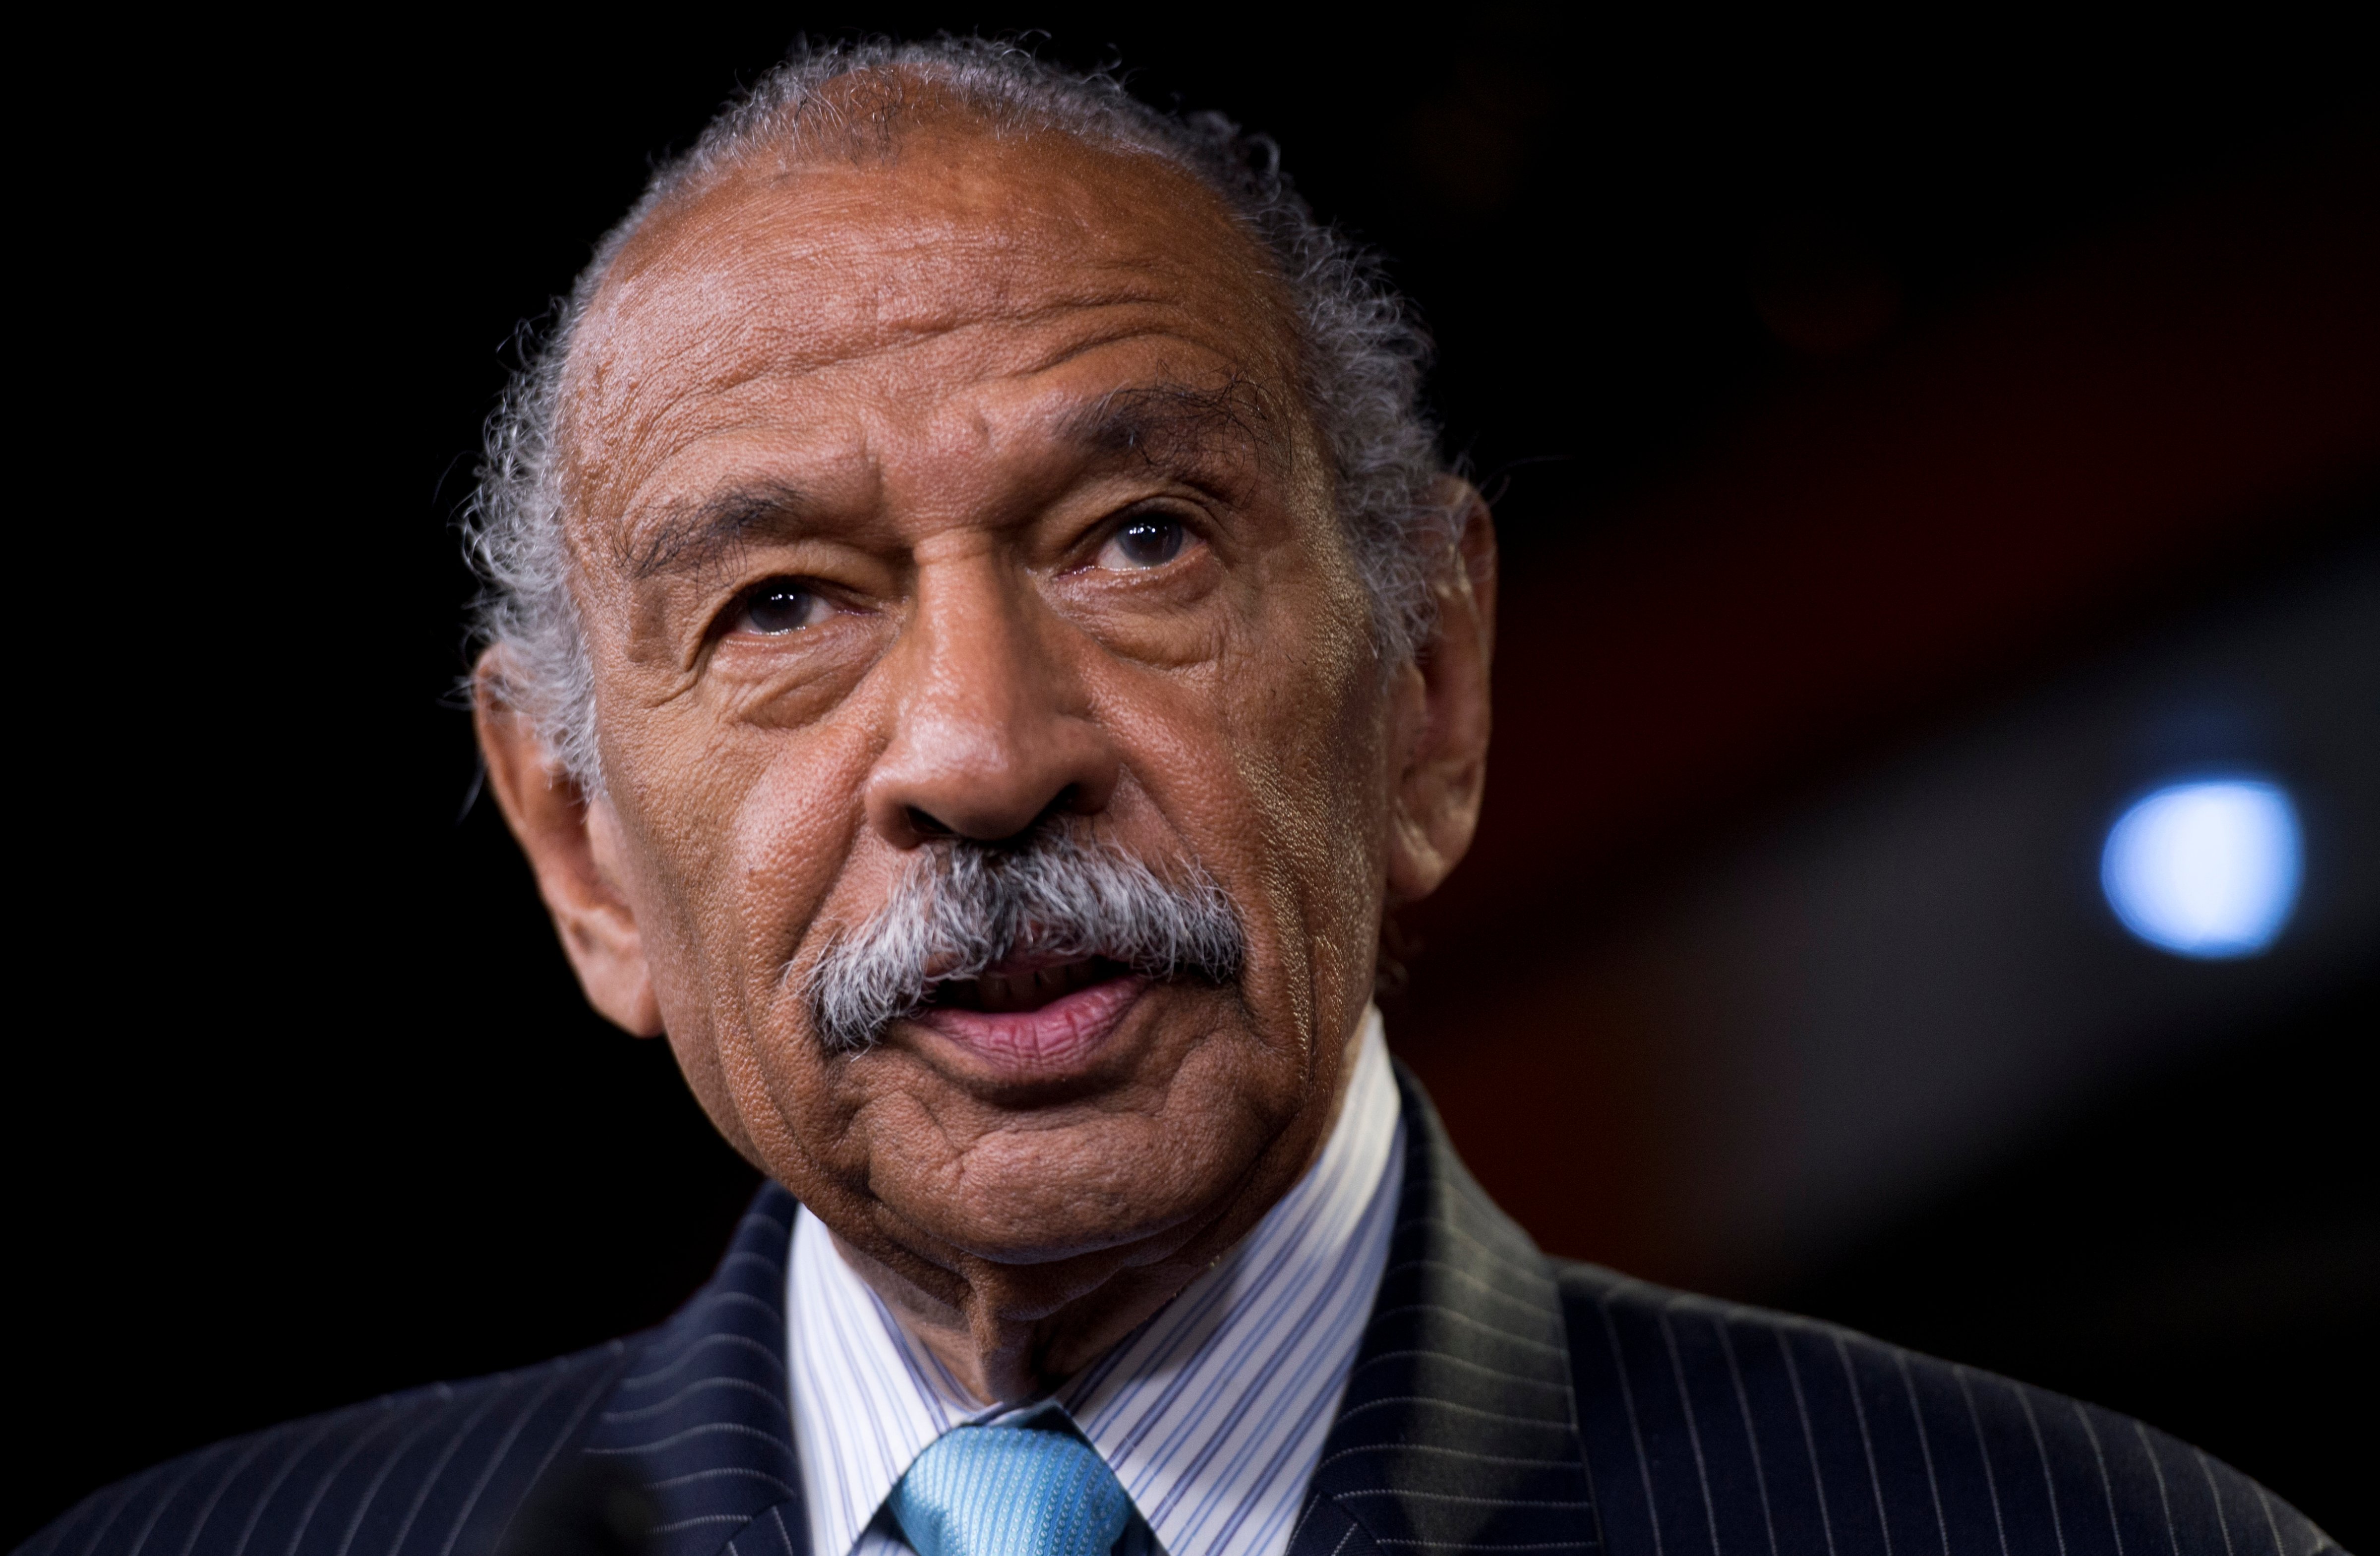 Rep. John Conyers, D-Mich., speaks during a Congressional Progressive Caucus news conference in the Capitol Visitor Center to introduce the Deal for All resolution. (Tom Williams&mdash;CQ-Roll Call,Inc./Getty Images)